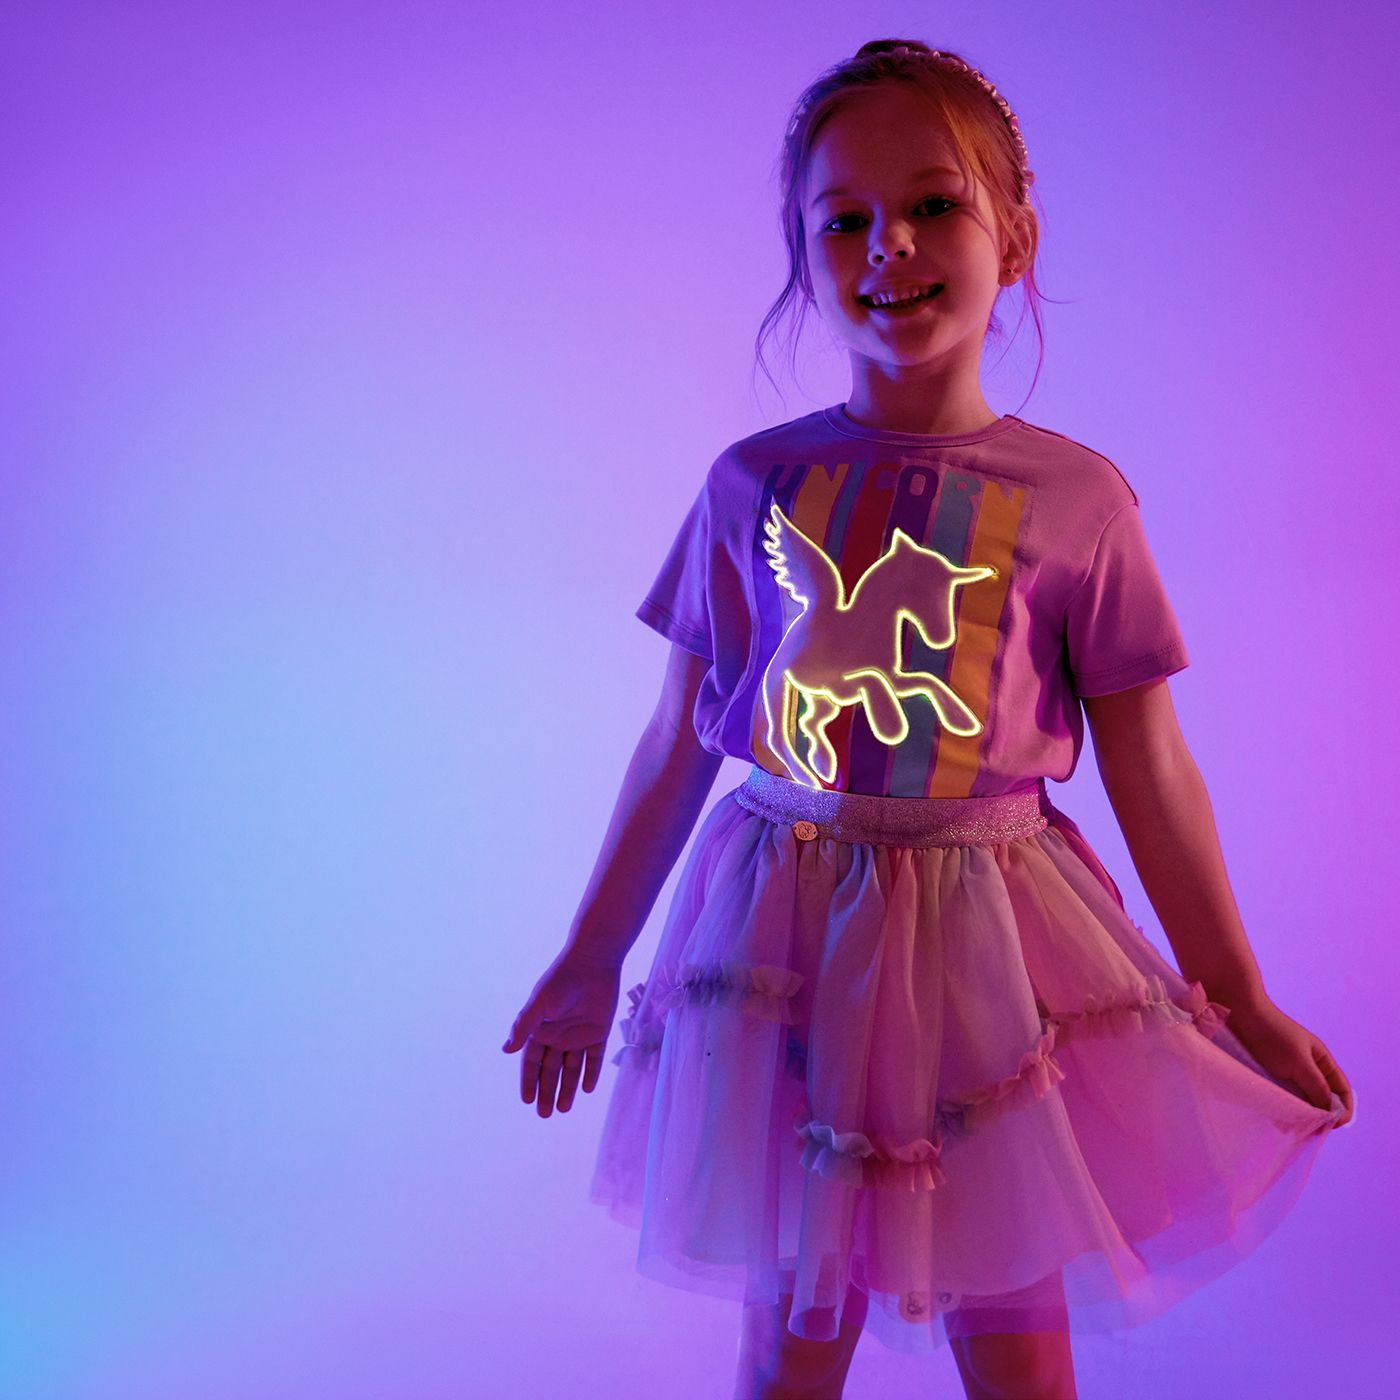 Go-Glow Illuminating T-shirt with Light Up Unicorn Including Controller (Built-In Battery)